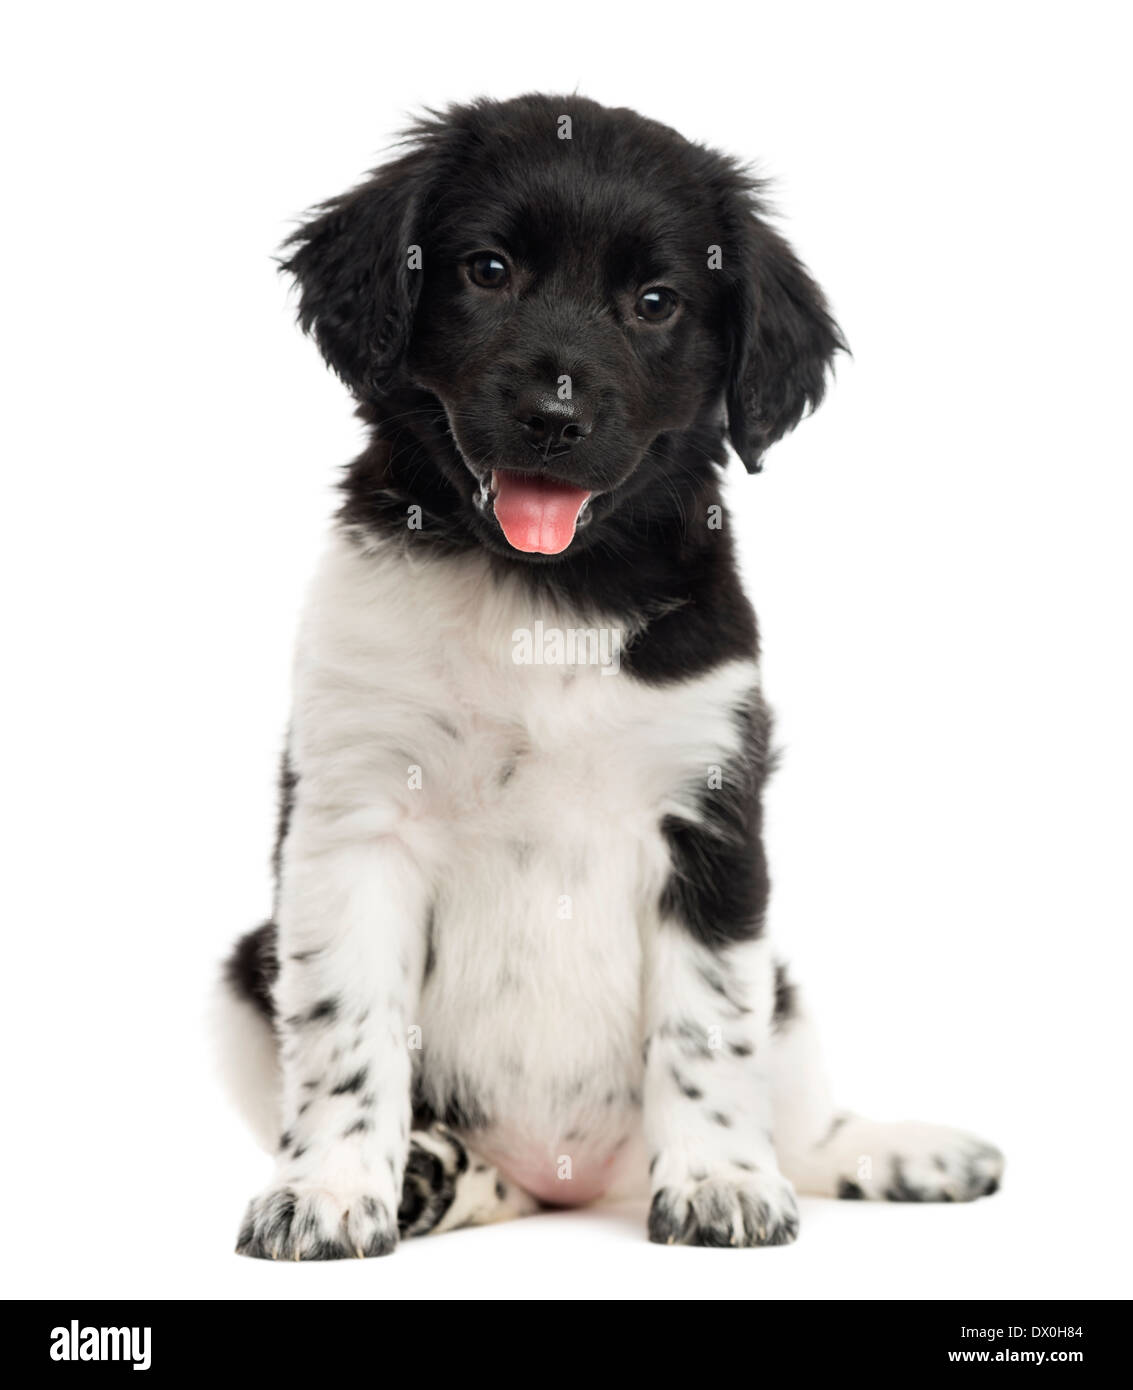 Stabyhoun puppy sitting, panting, looking at the camera, against white background Stock Photo